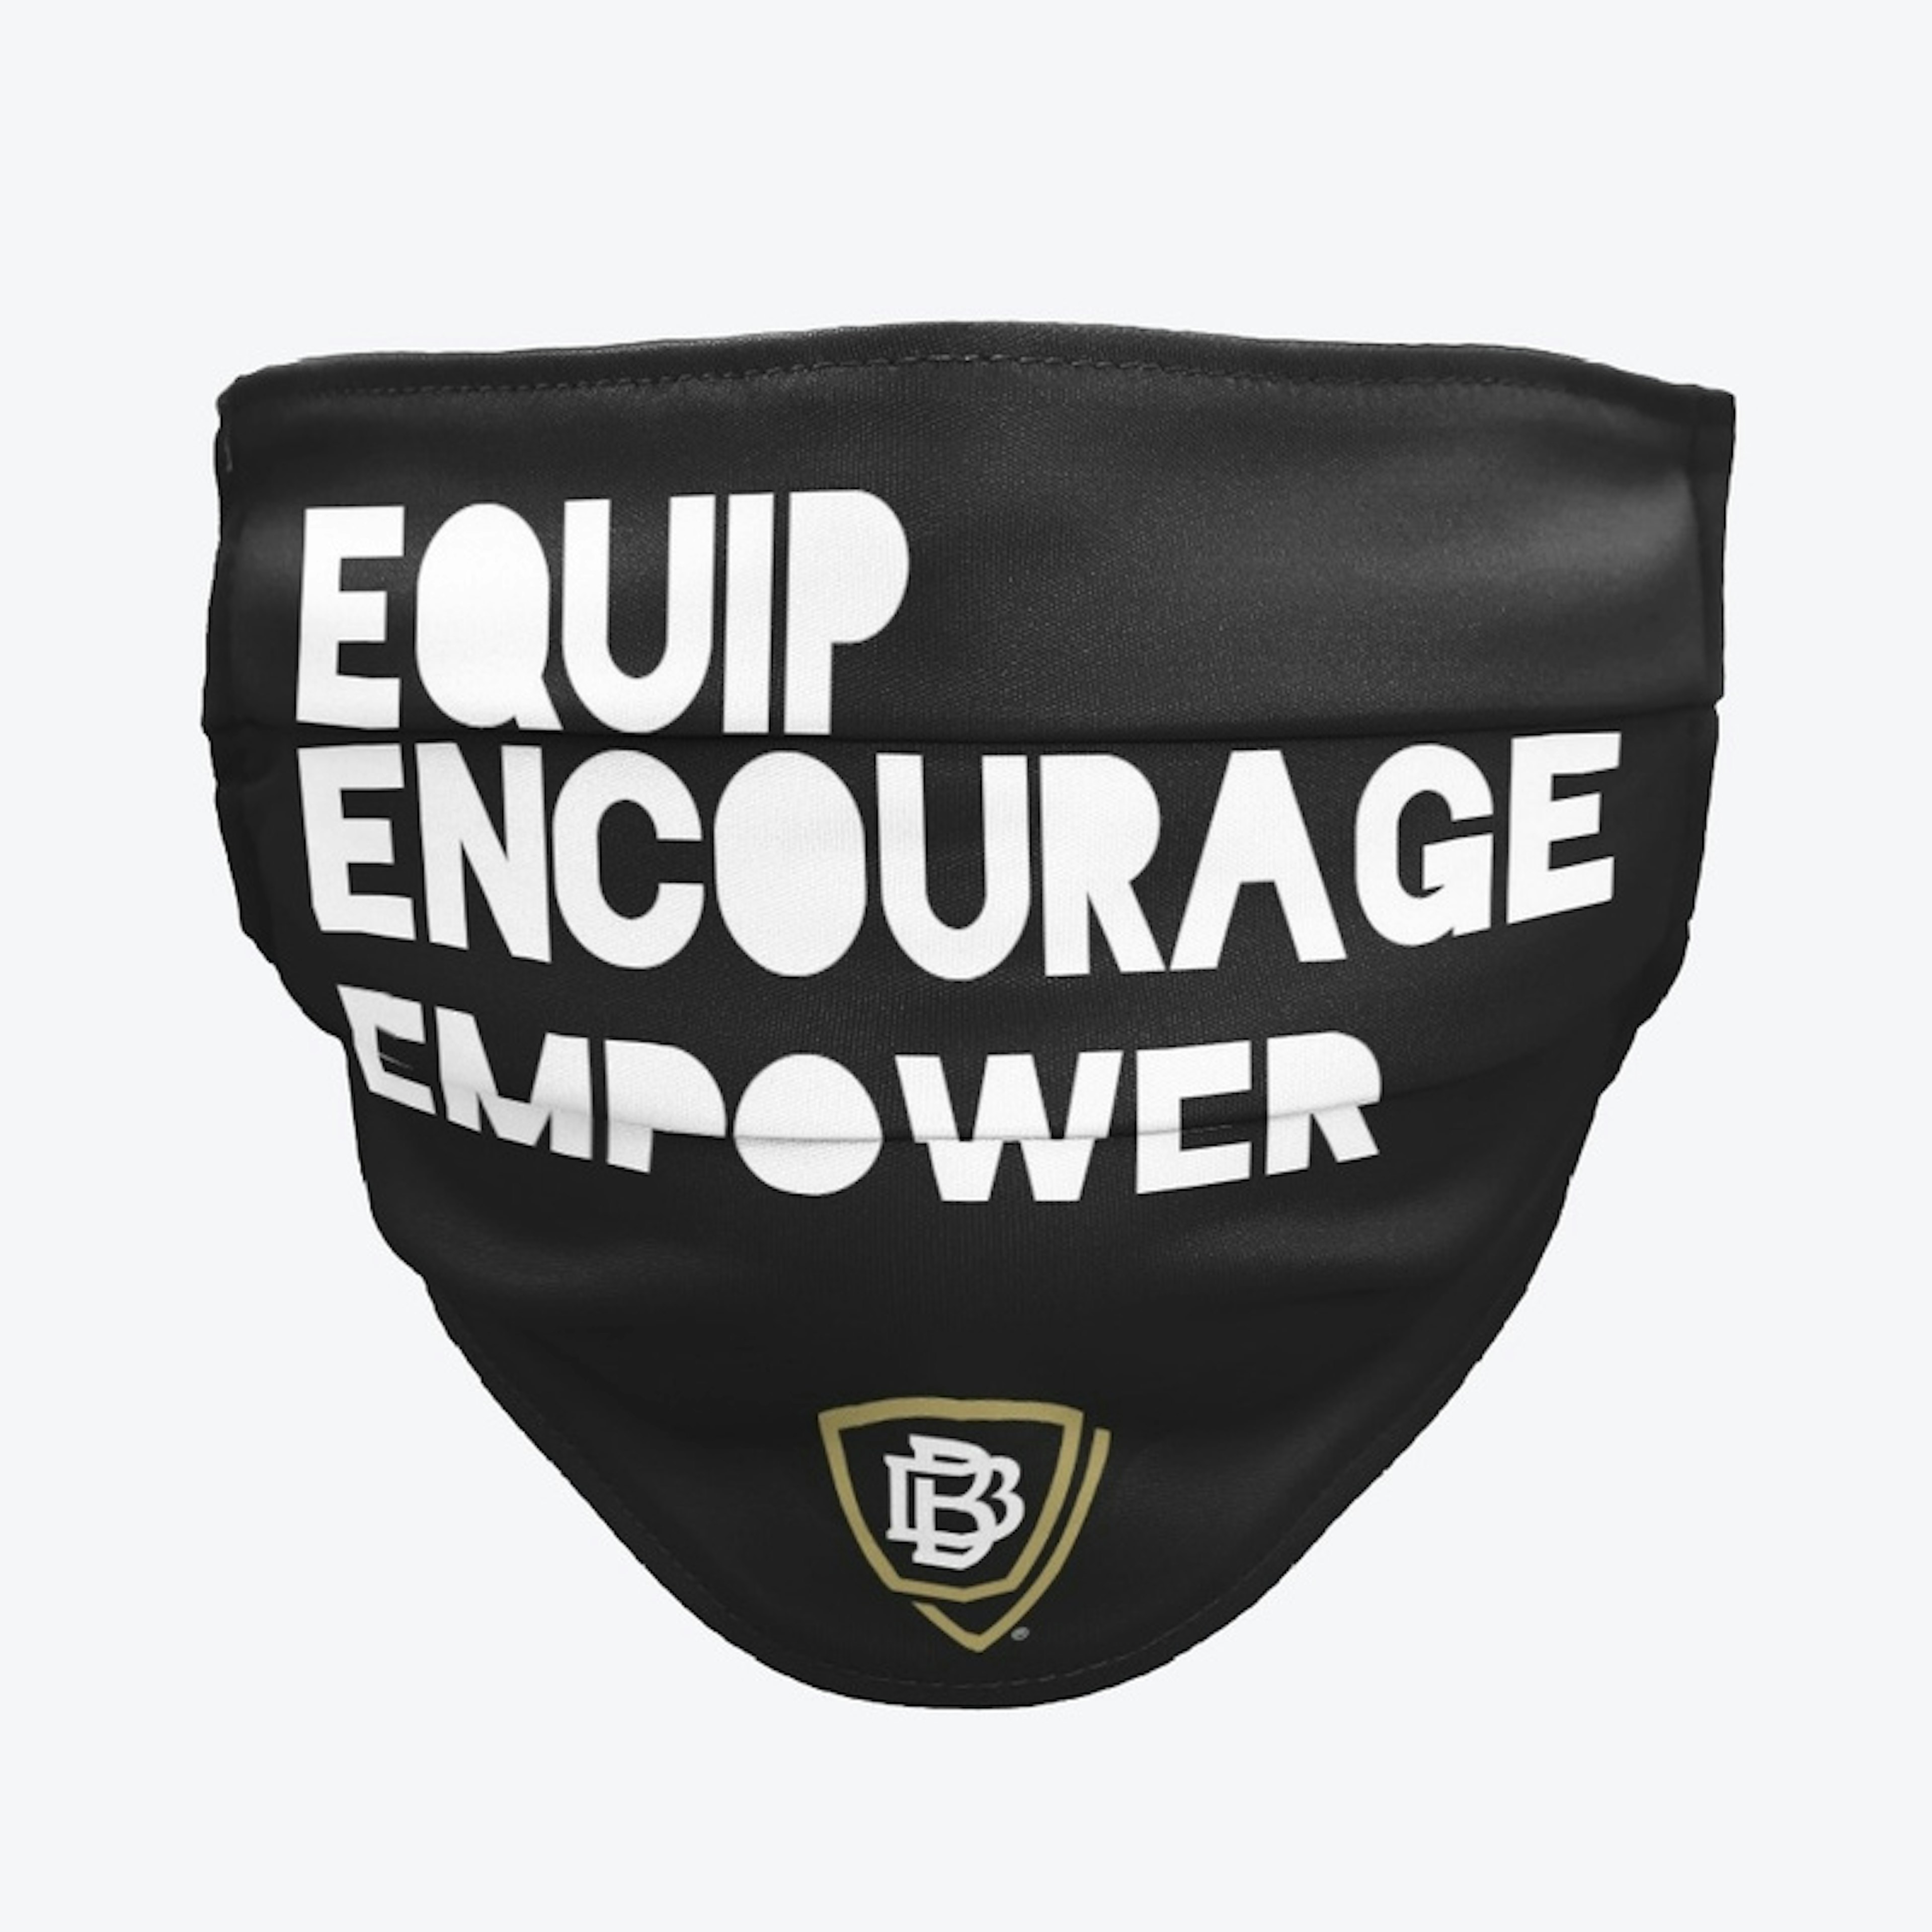 Equip Encourage Empower face mask